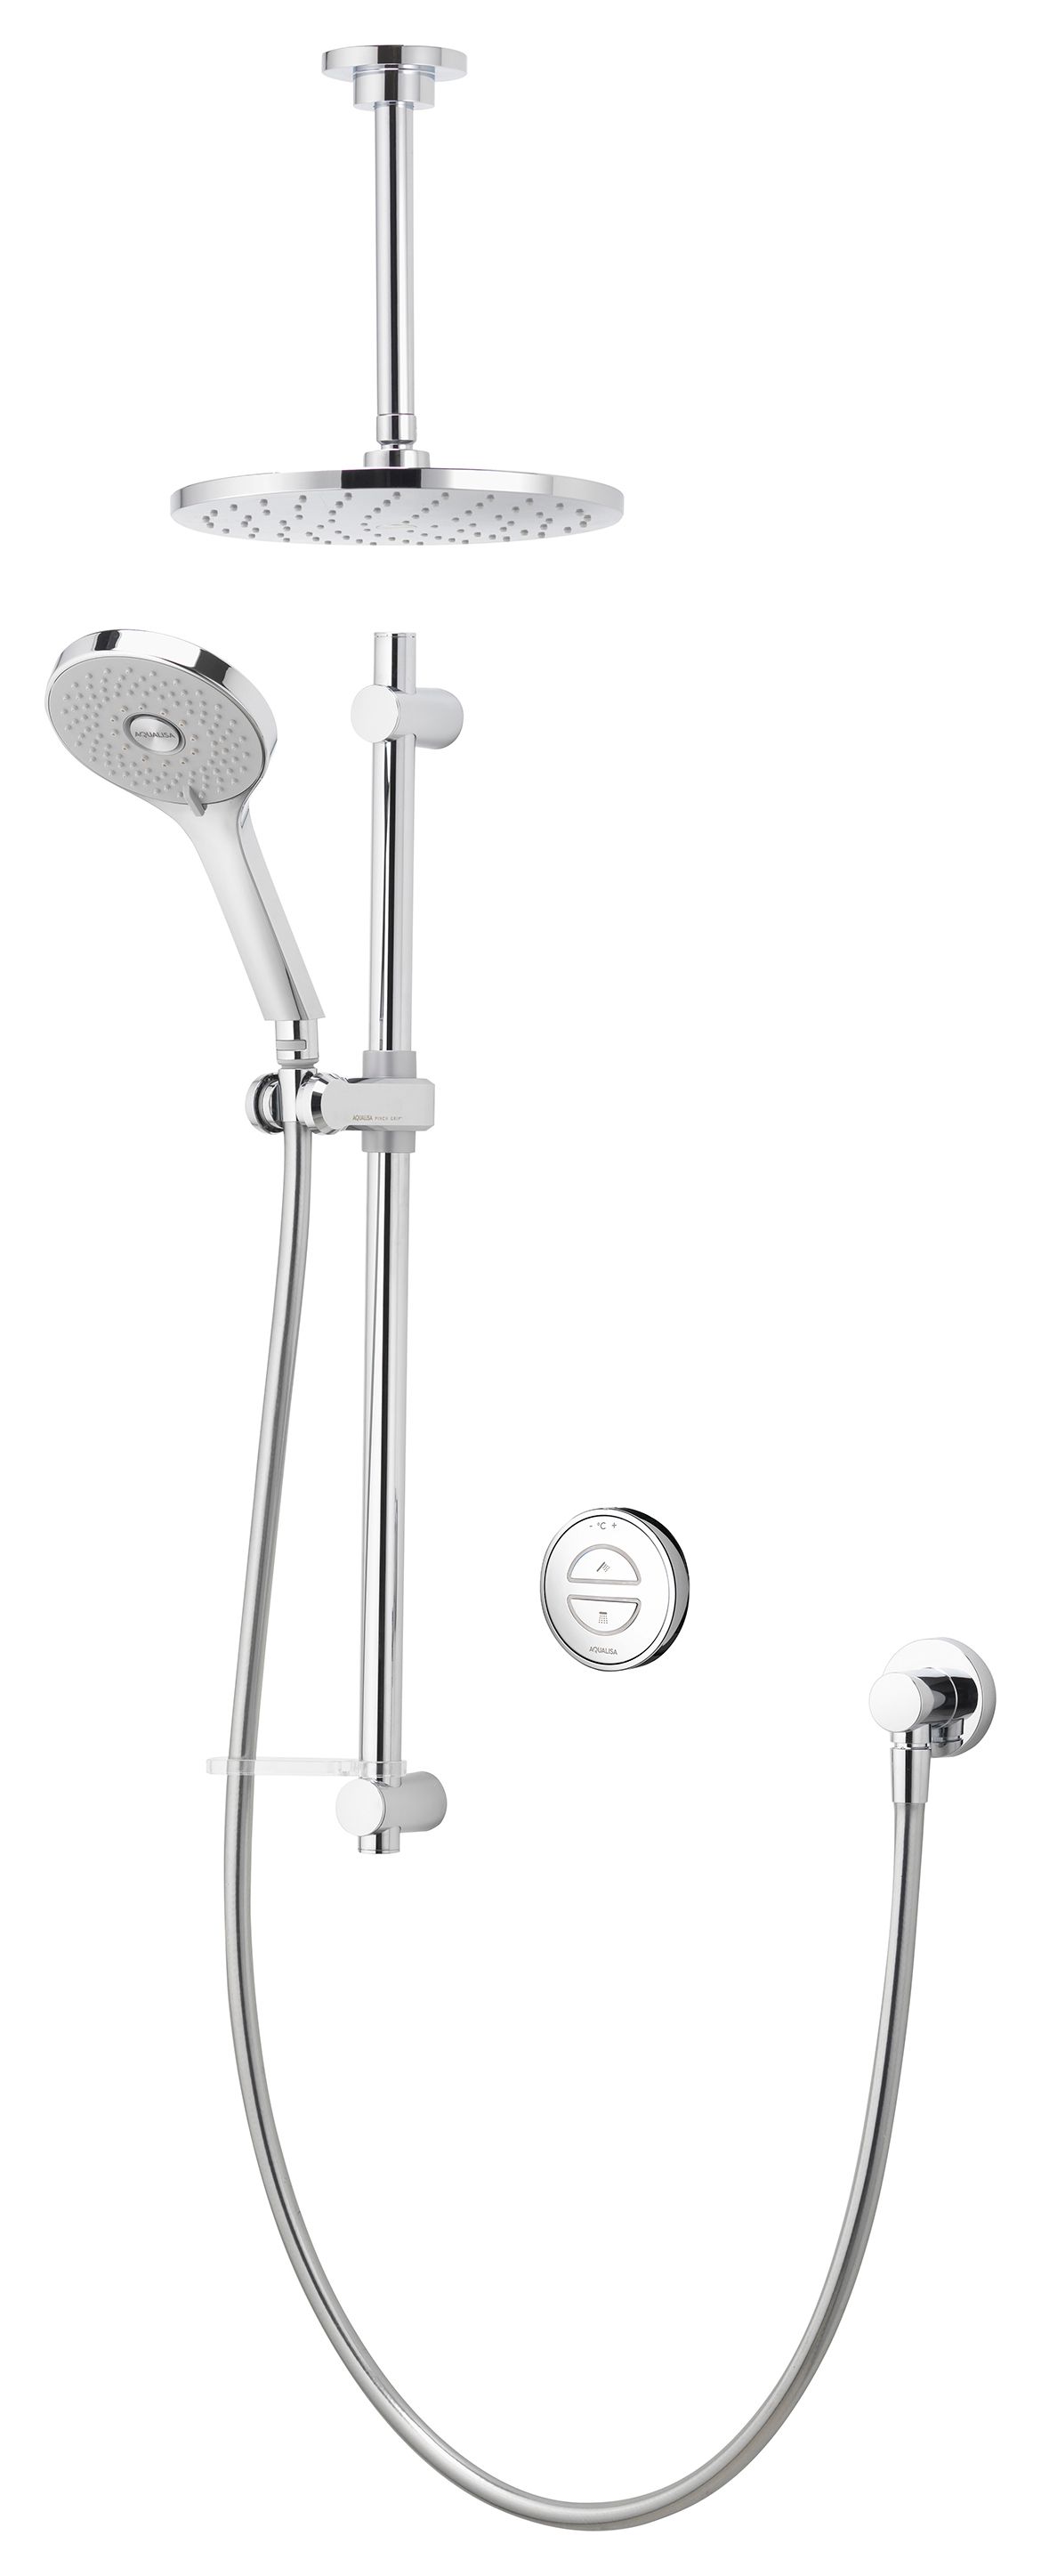 Image of Aqualisa Unity Q Smart Divert Concealed Gravity Pumped Shower with Adjustable & Ceiling Fixed Shower Head